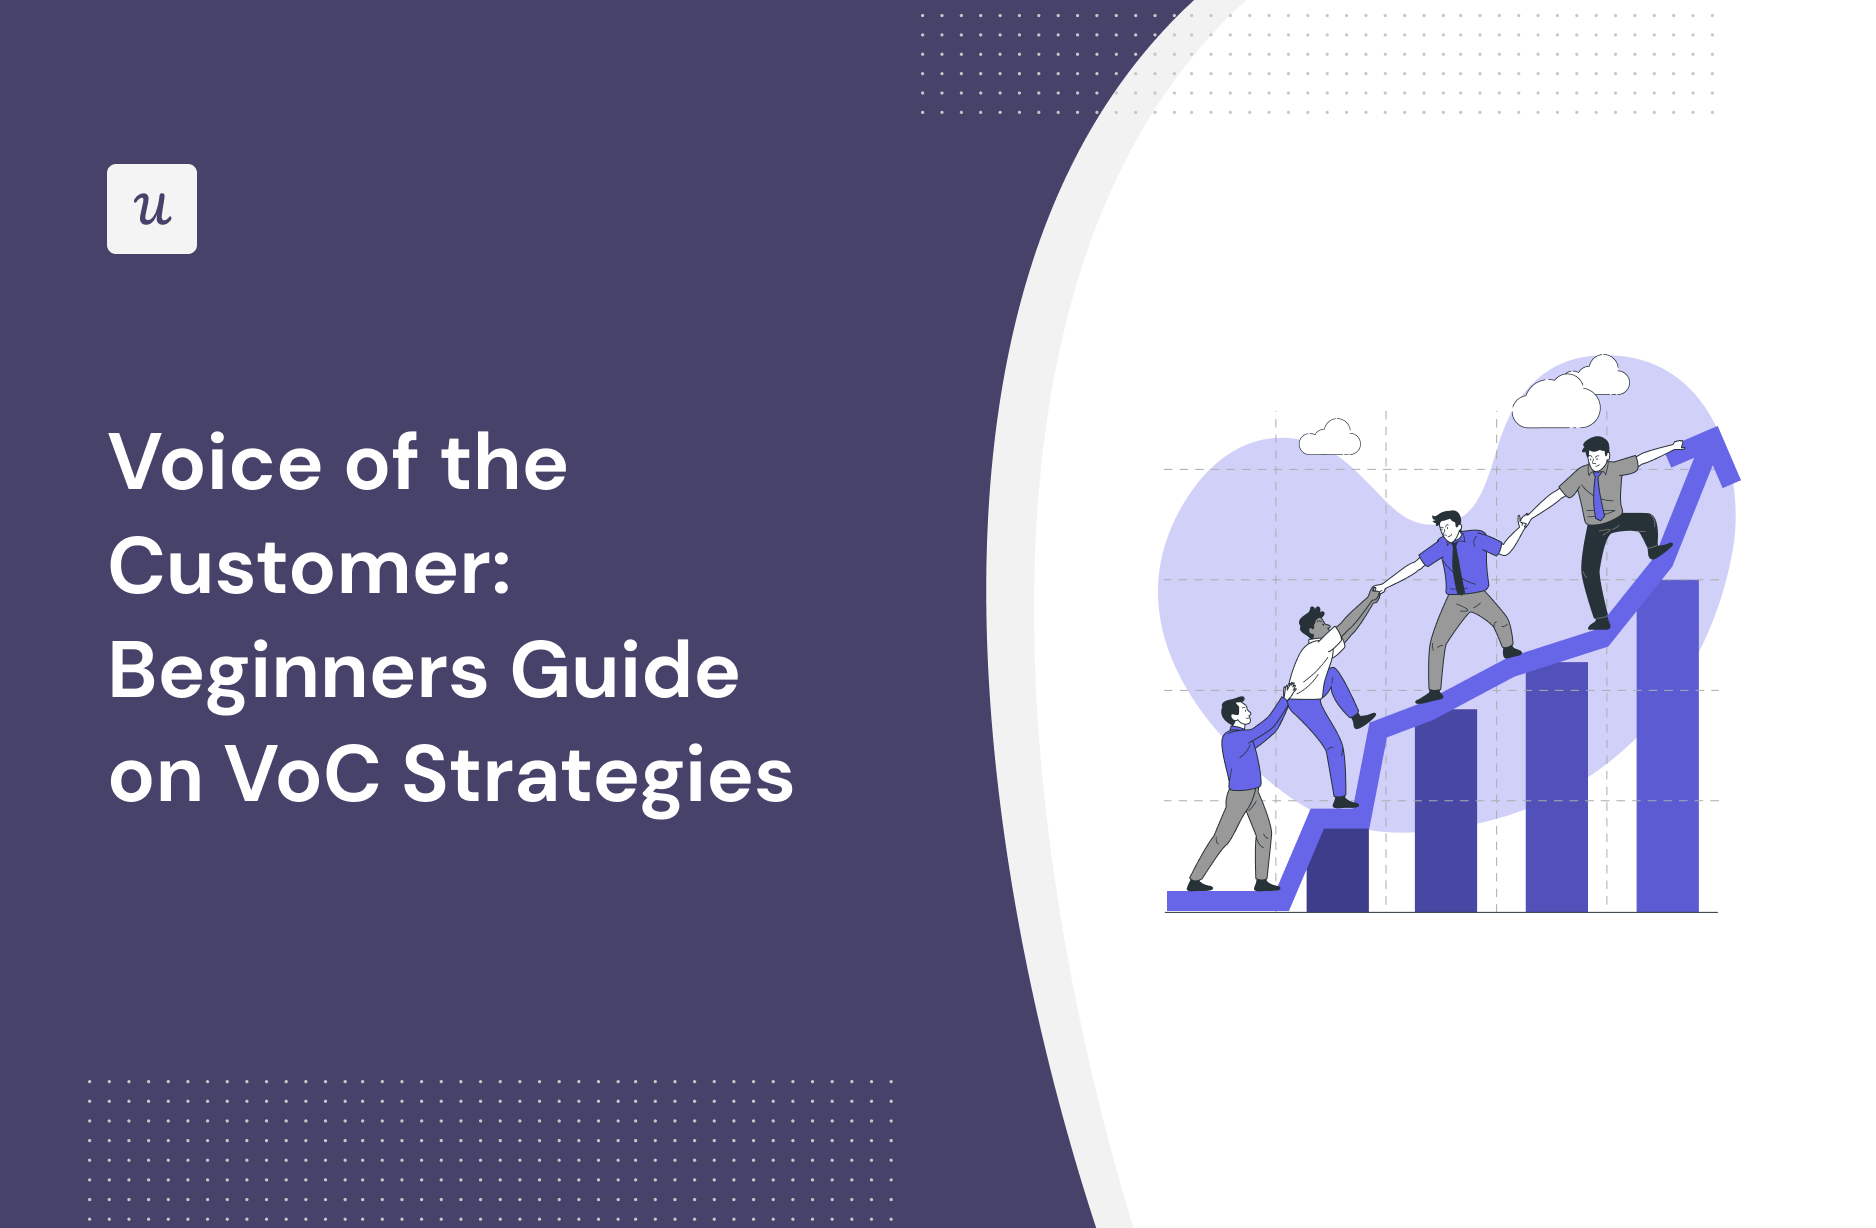 Voice of the Customer: Beginners Guide on VoC Strategies